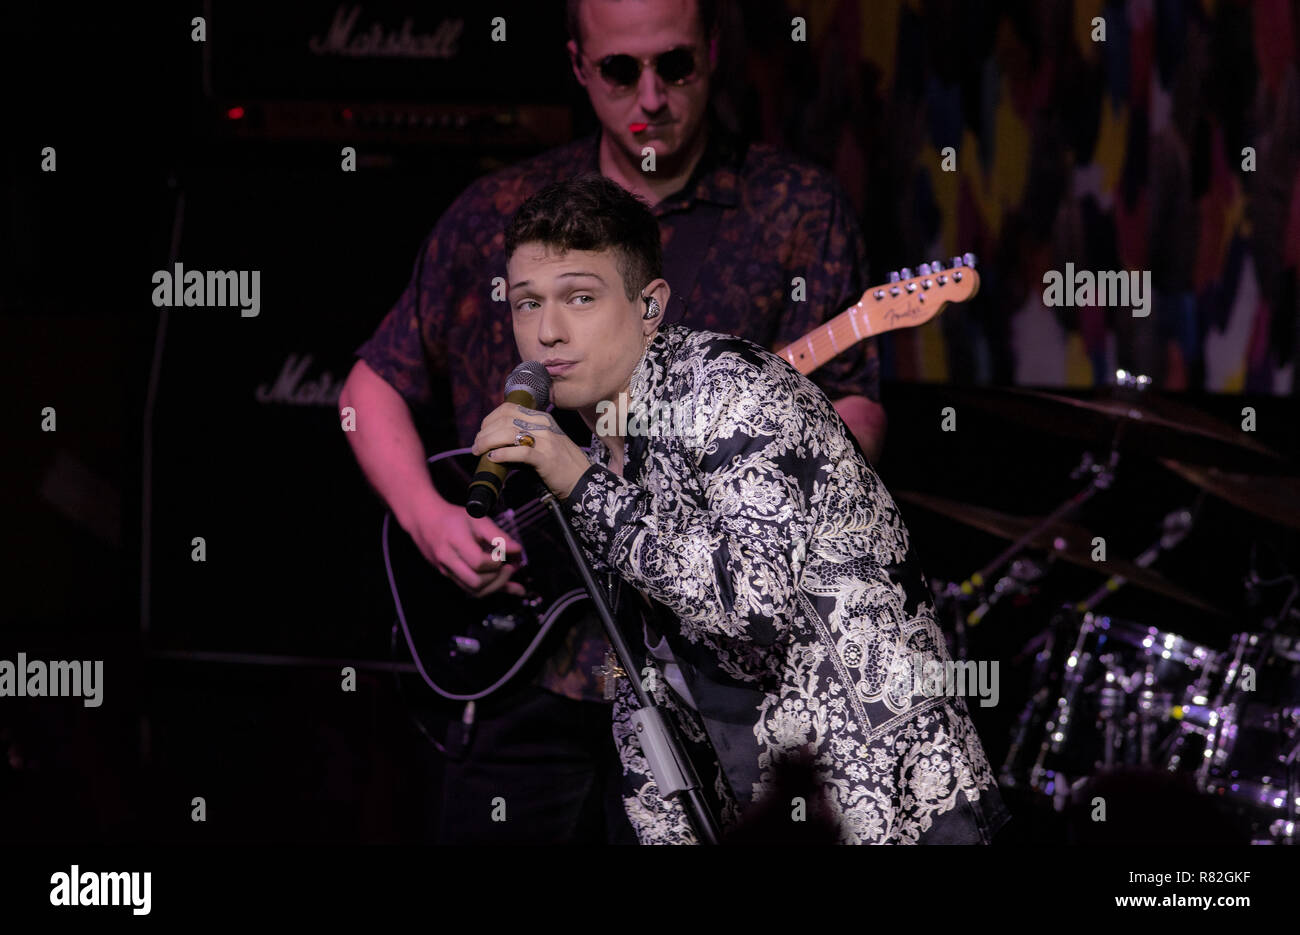 Napoli, Italy. 19th Mar, 2017. Irama is an Italian songwriter, who took part in Amici, performs live at Duel Beat in Napoli with 'Giovani per sempre tour'. Credit: Francesco Cigliano/Pacific Press/Alamy Live News Stock Photo